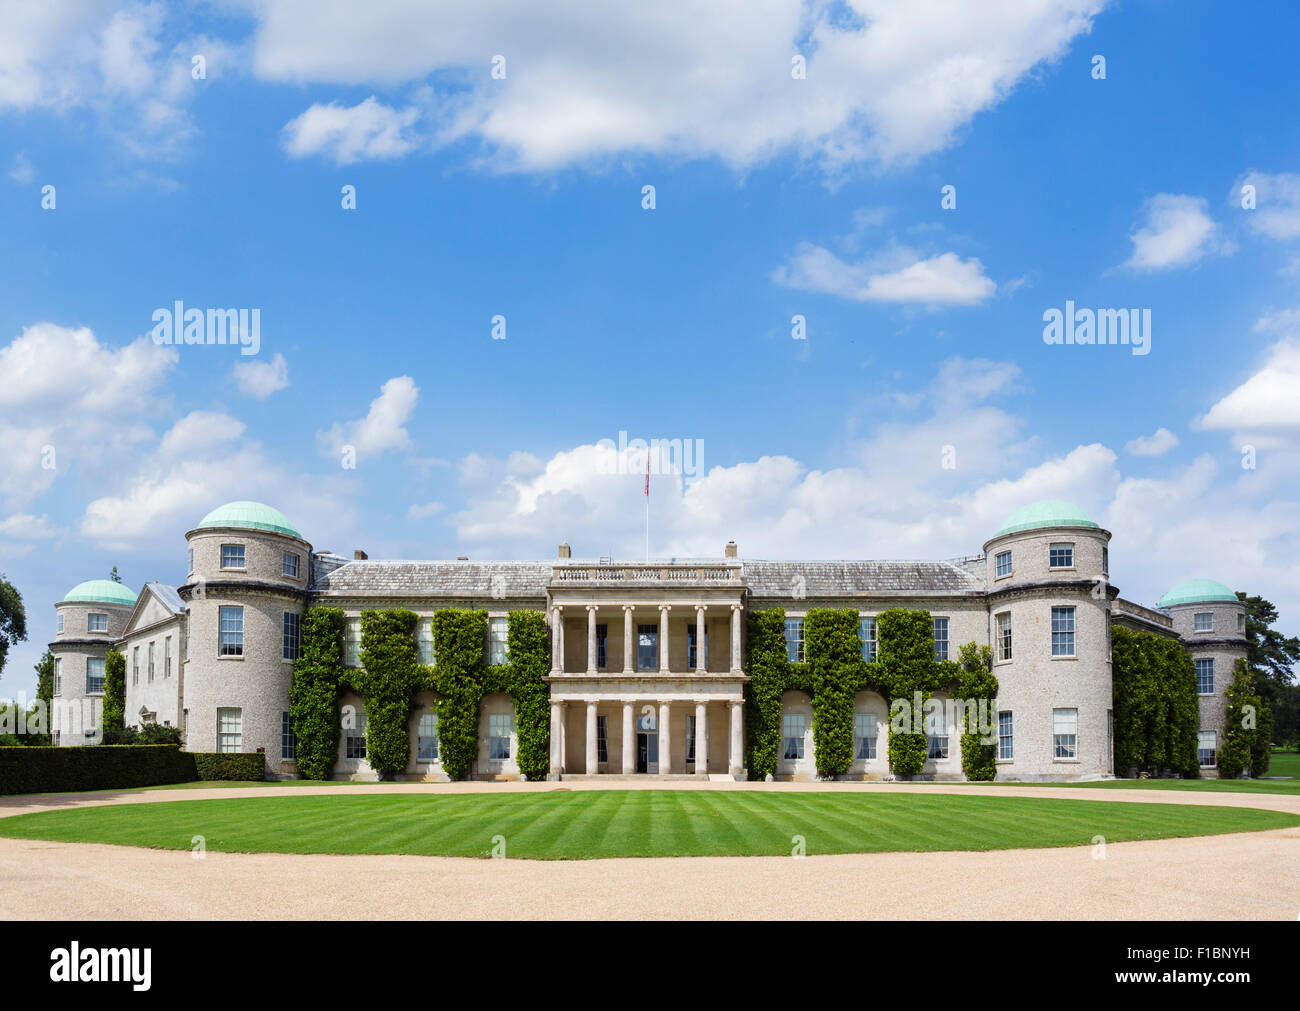 Goodwood House, West Sussex, in Inghilterra, Regno Unito Foto Stock